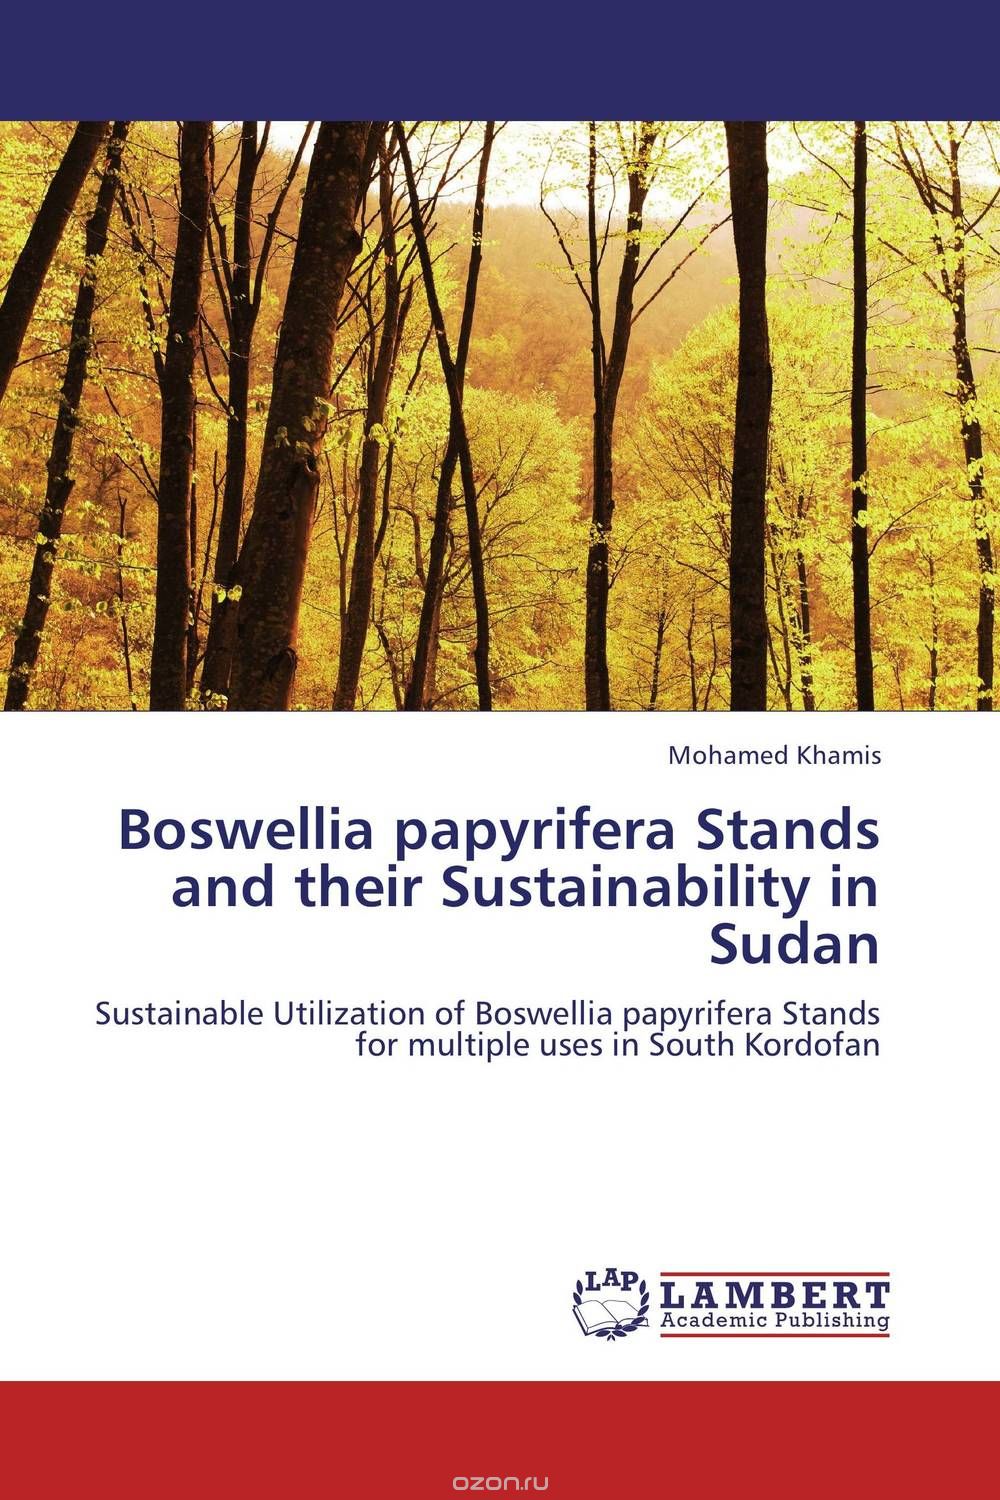 Скачать книгу "Boswellia papyrifera Stands and their Sustainability in Sudan"